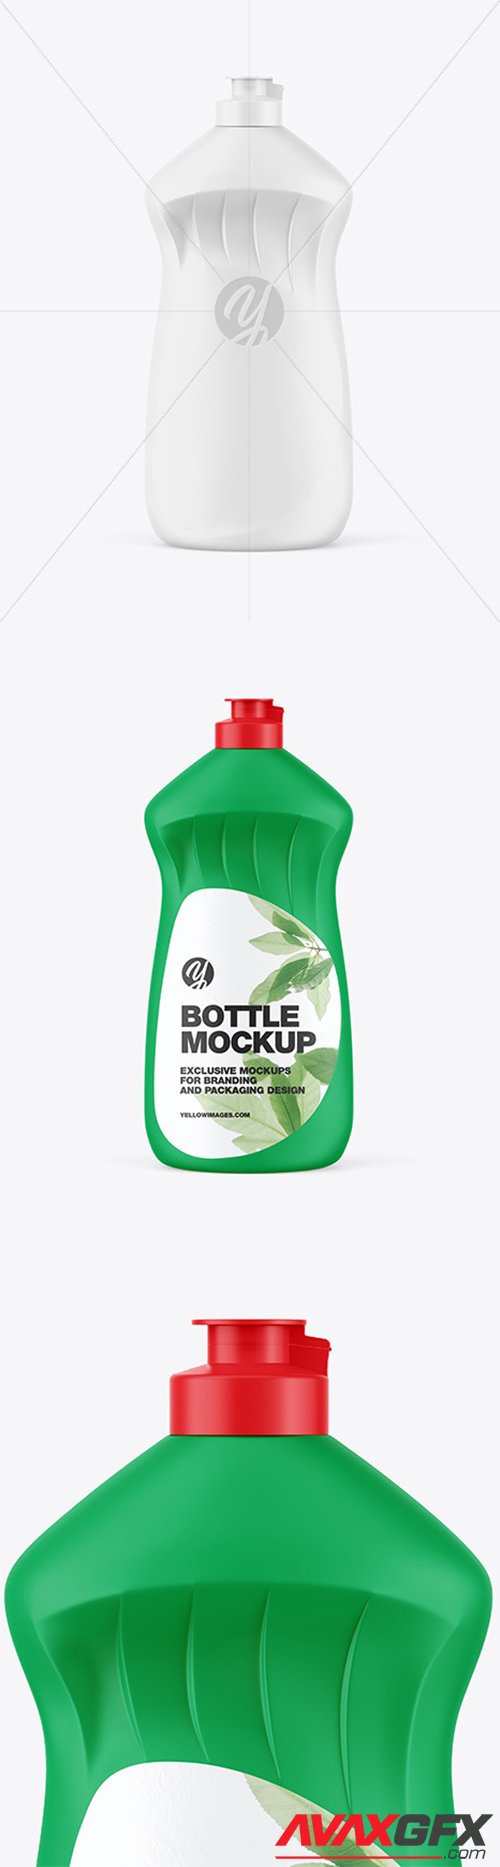 Download Washing Up Liquid Glossy Bottle W Closed Cap Mockup 62001 Avaxgfx All Downloads That You Need In One Place Graphic From Nitroflare Rapidgator PSD Mockup Templates